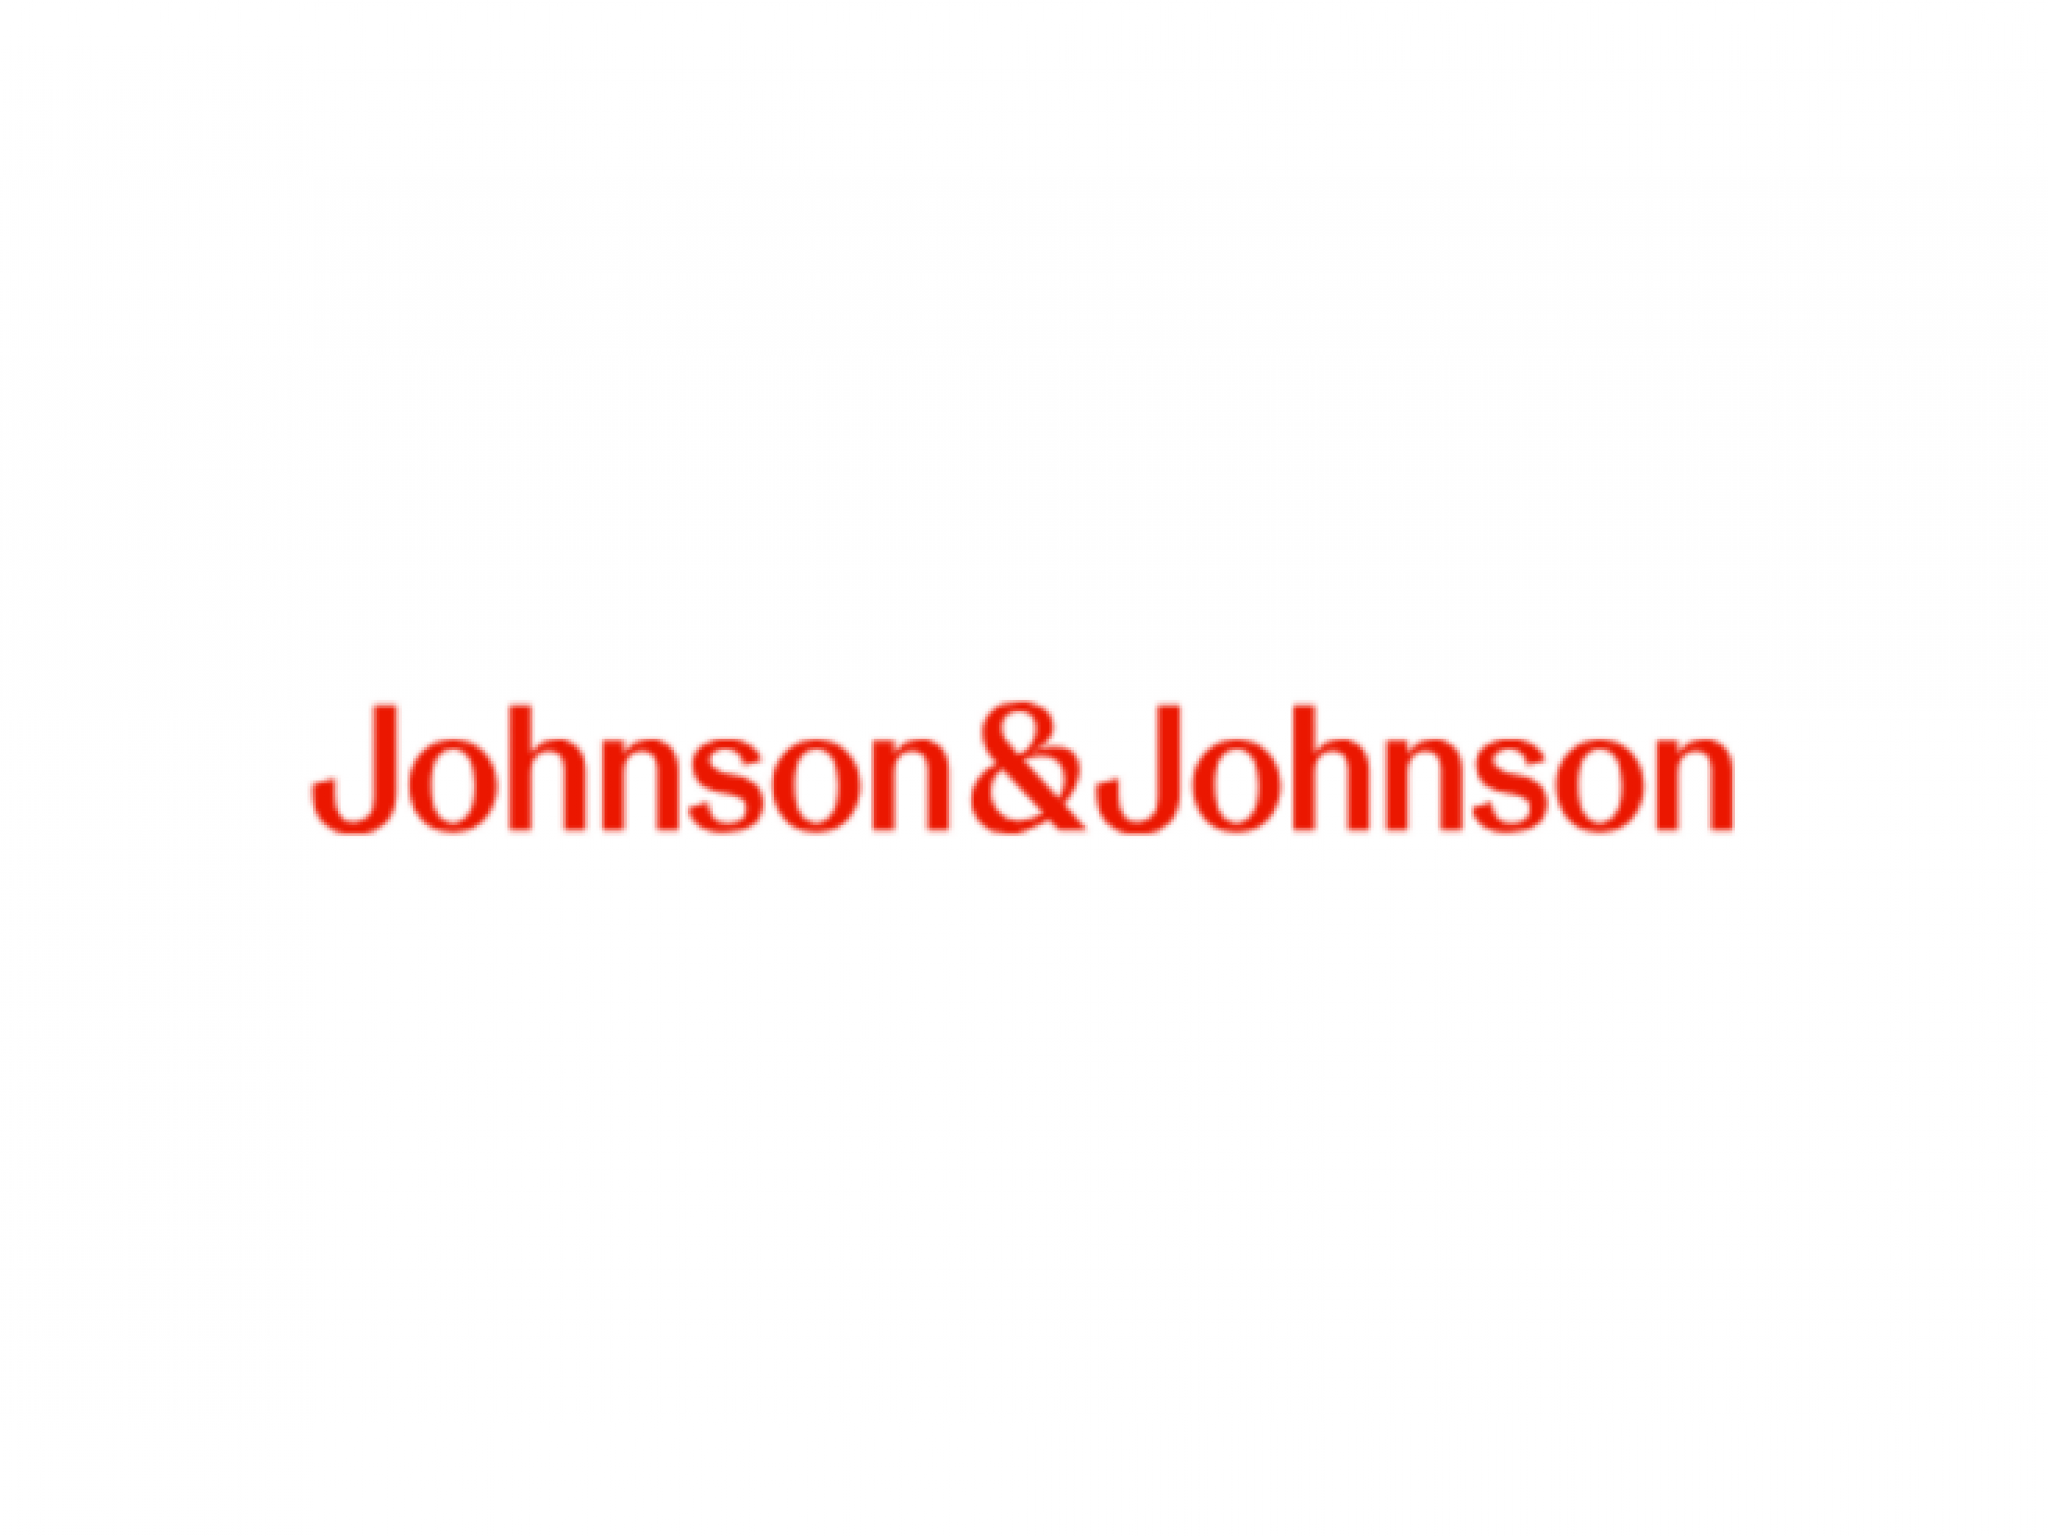  johnson--johnson-secures-complete-fda-approval-for-bladder-cancer-drug-balversa-after-almost-five-years-of-accelerated-approval 